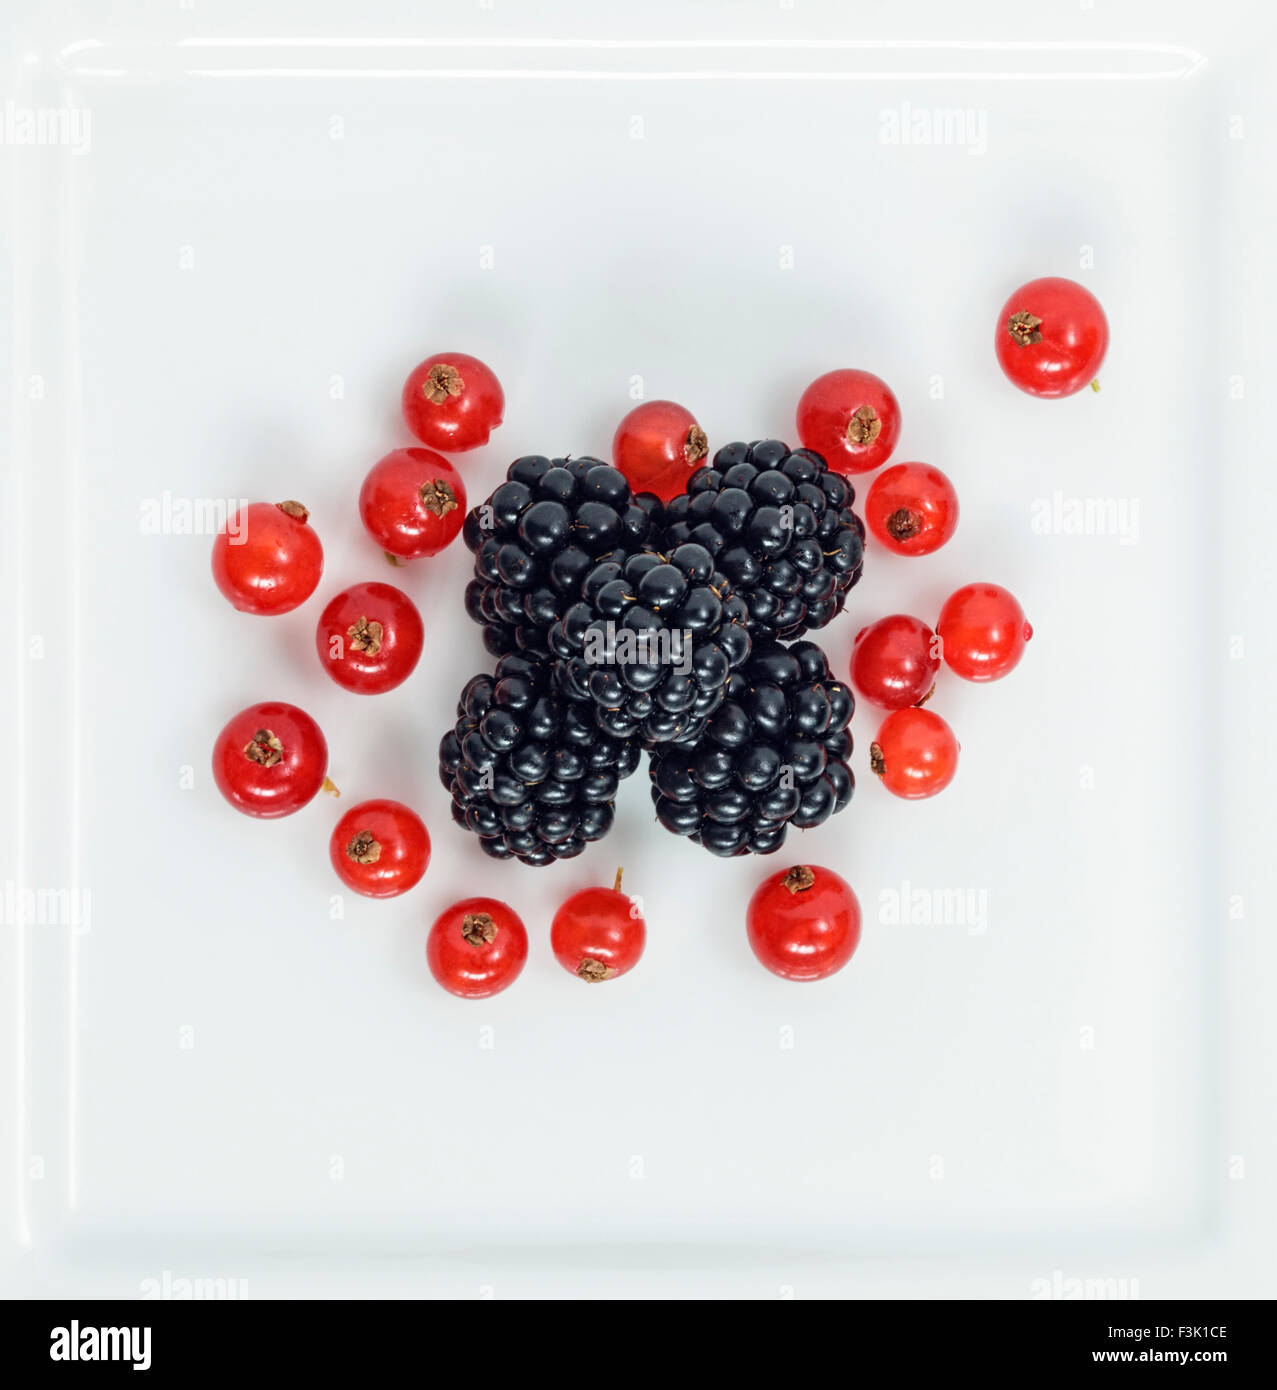 Redcurrant's and Blackberries on white square plate Stock Photo